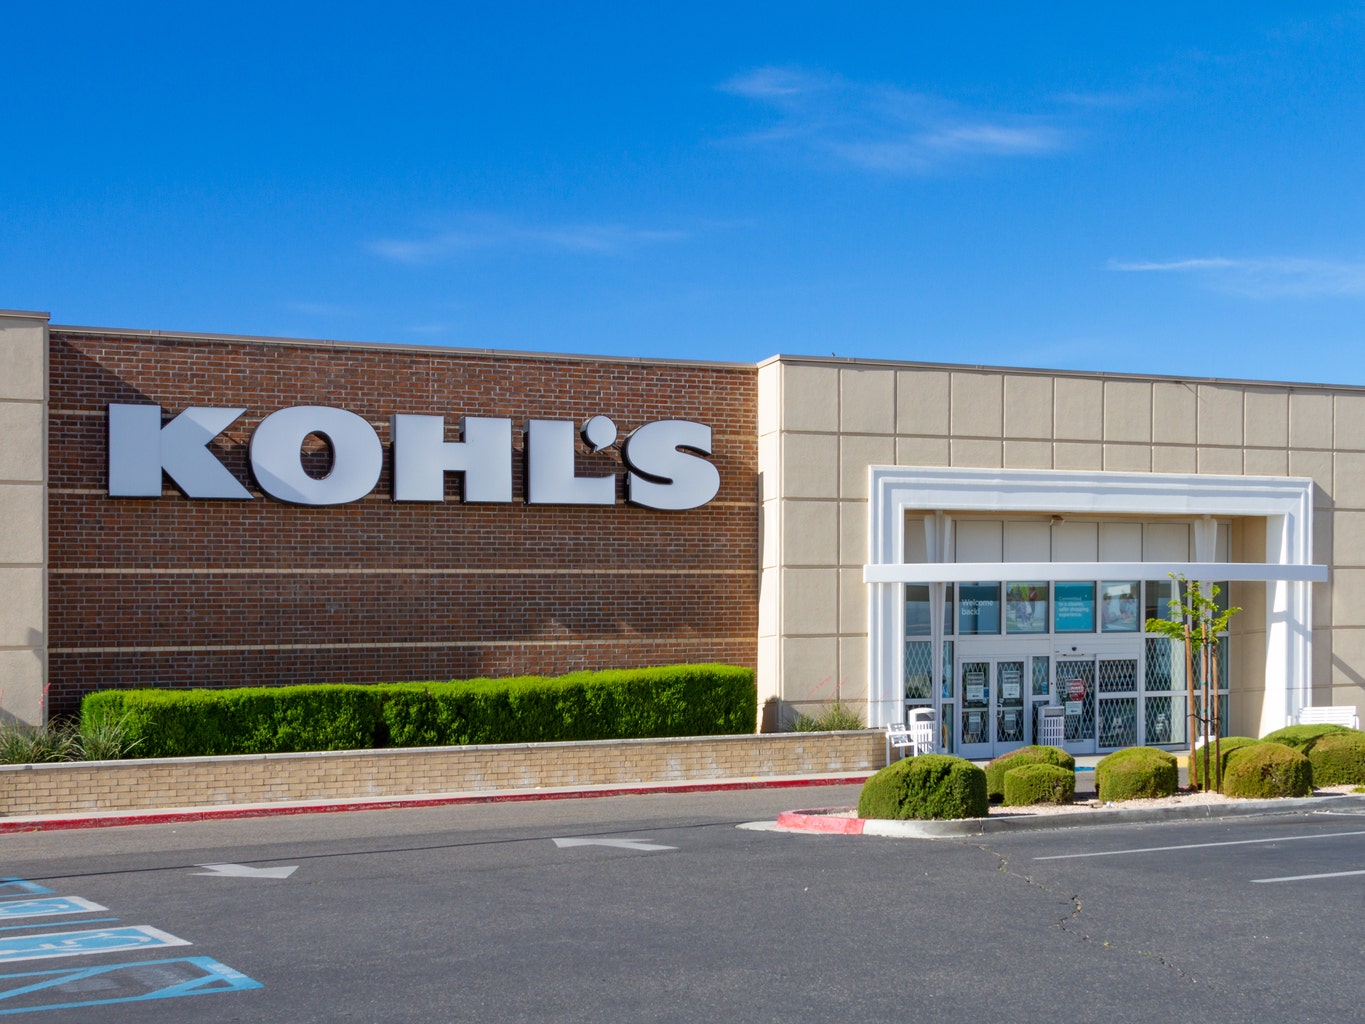 Kohl's To Roll Out Sephora Beauty Shops To All 1,100 Stores For $2 Billion  In Sales By 2025